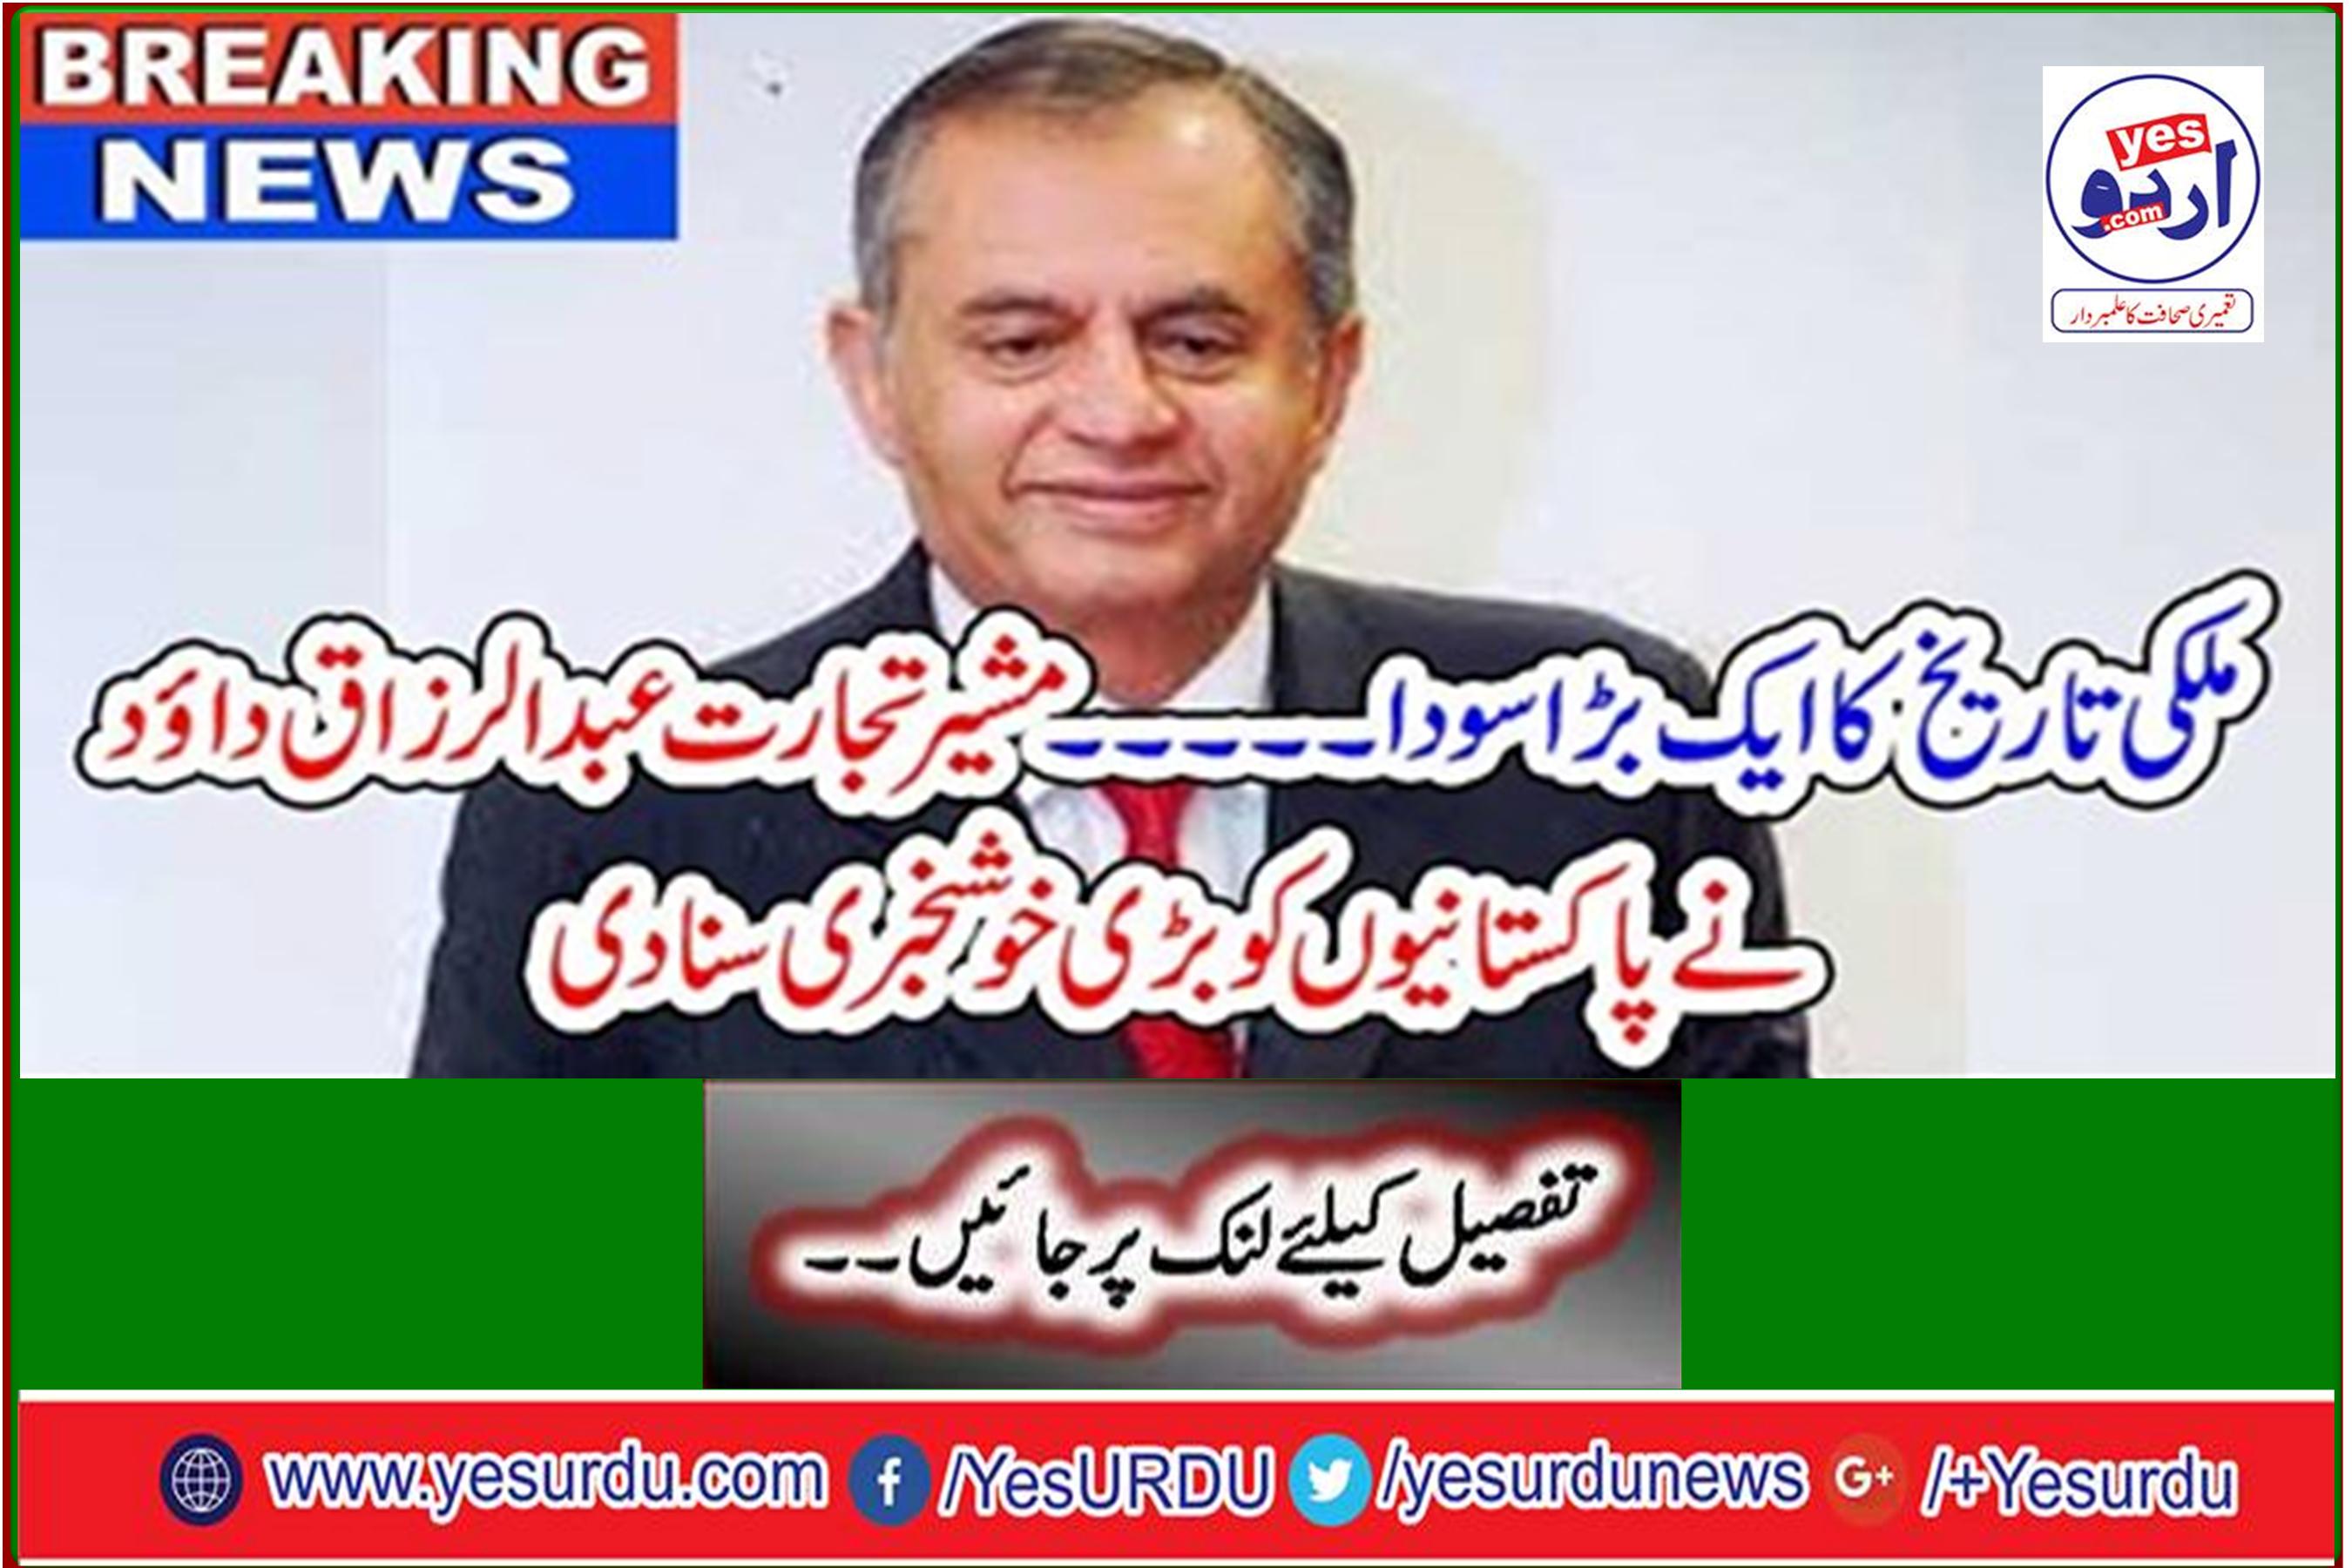 Breaking News: A Great Deal in Country History ... Adviser to the President Abdul Razzaq Dawood conveyed the good news to the Pakistanis